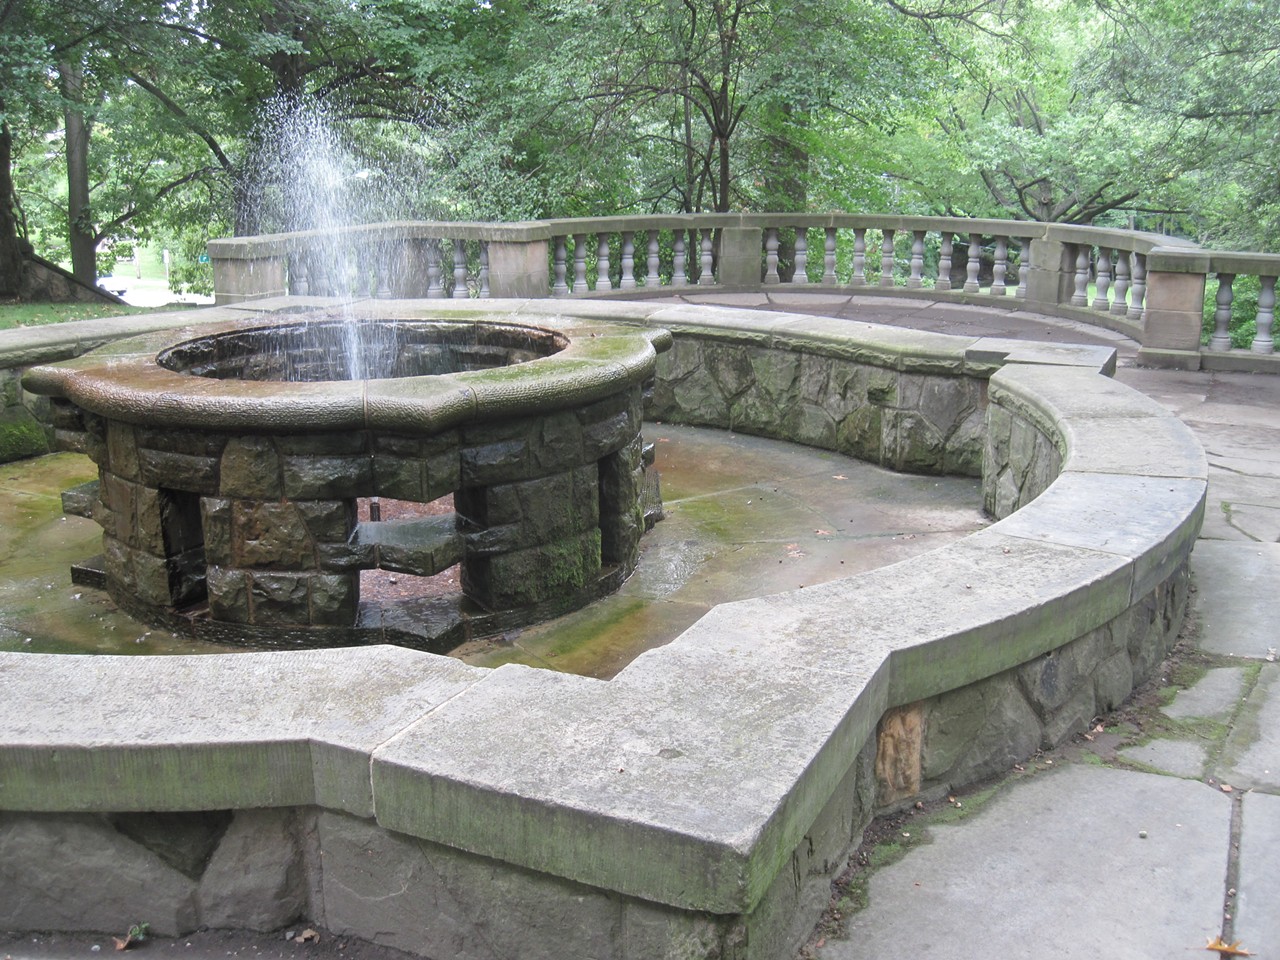 There are water displays throughout the Gardens.